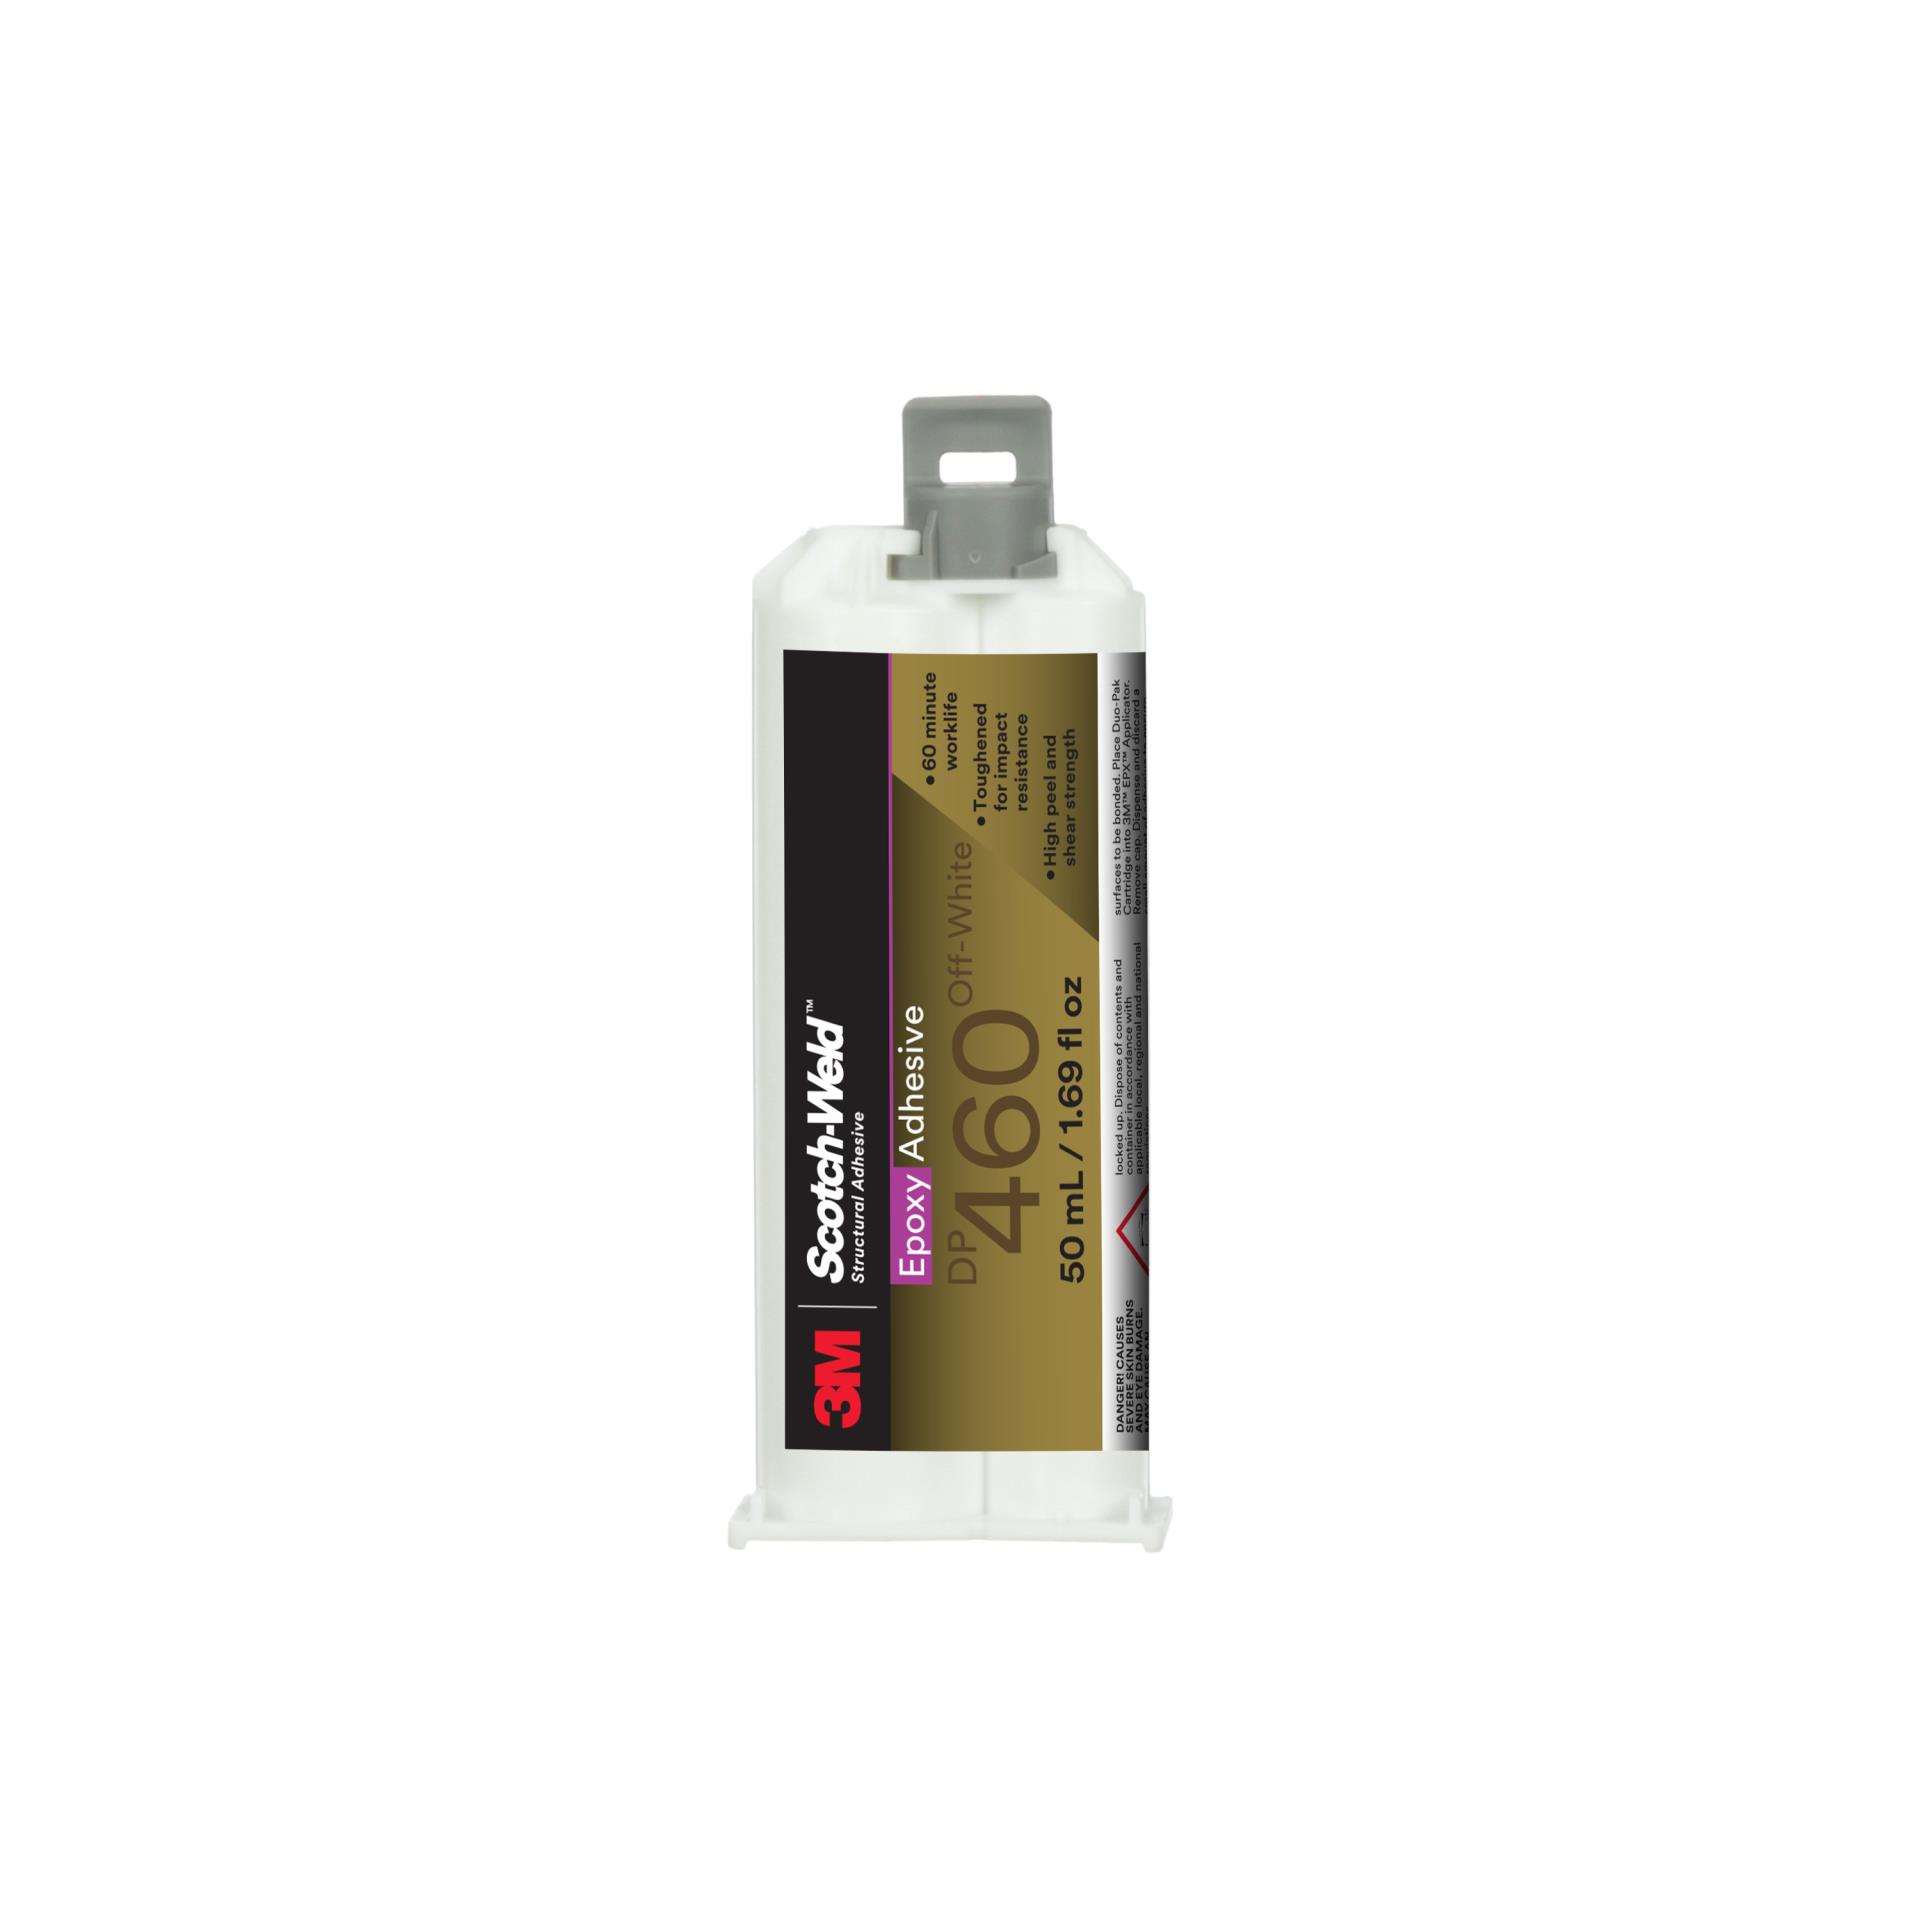 https://www.e-aircraftsupply.com/ItemImages/68/7100148768_3M_Scotch-Weld_Epoxy_Adhesive_DP460_Off-White.jpg